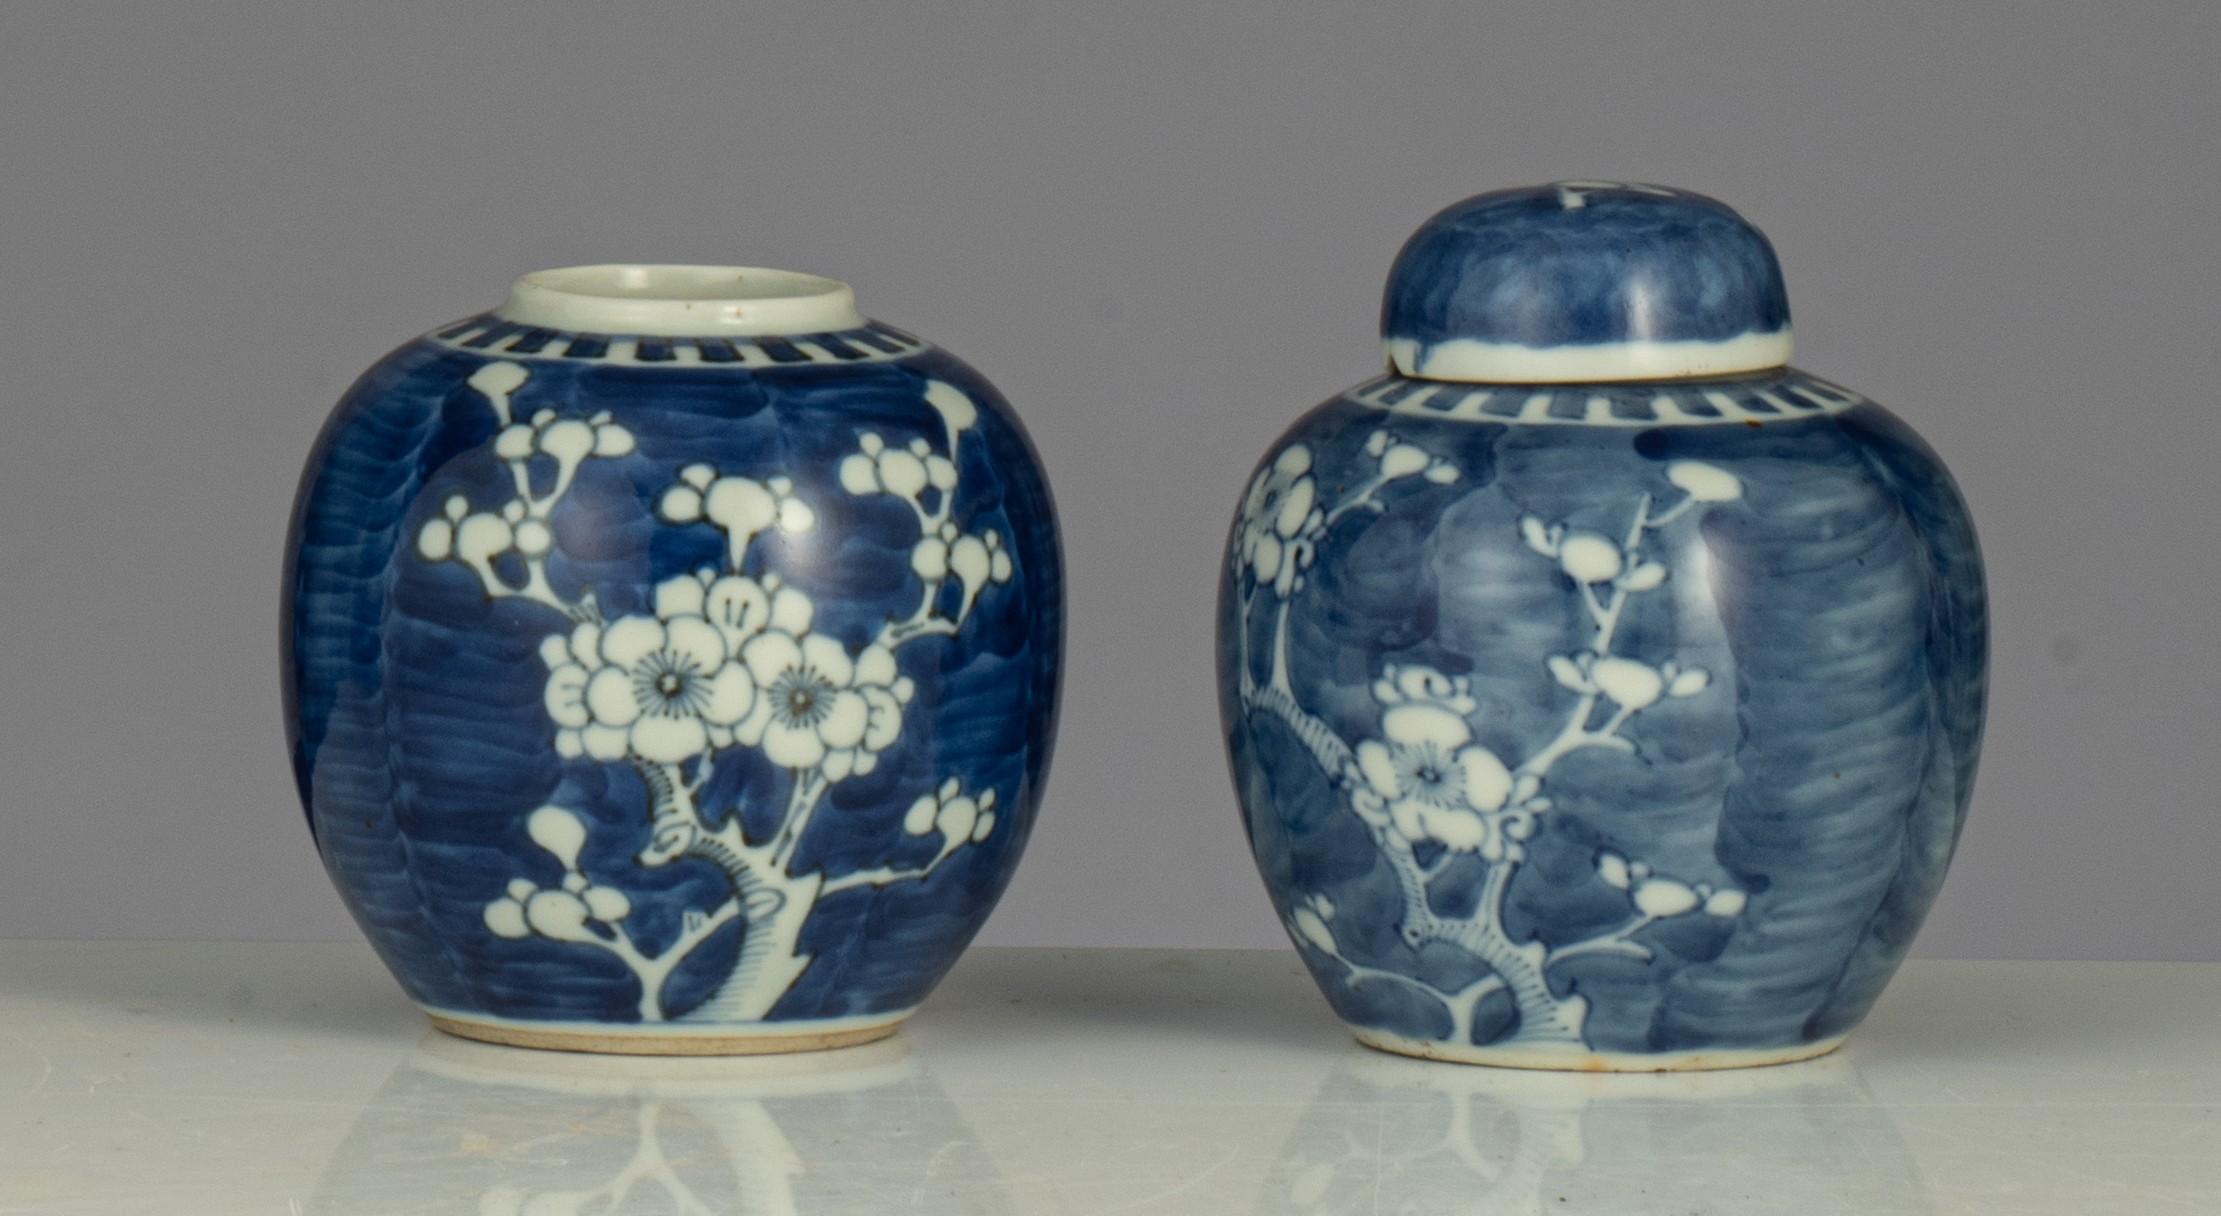 A collection of Chinese 'Prunus on cracked ice' pattern vases and jars, famille rose figures and pot - Image 25 of 37